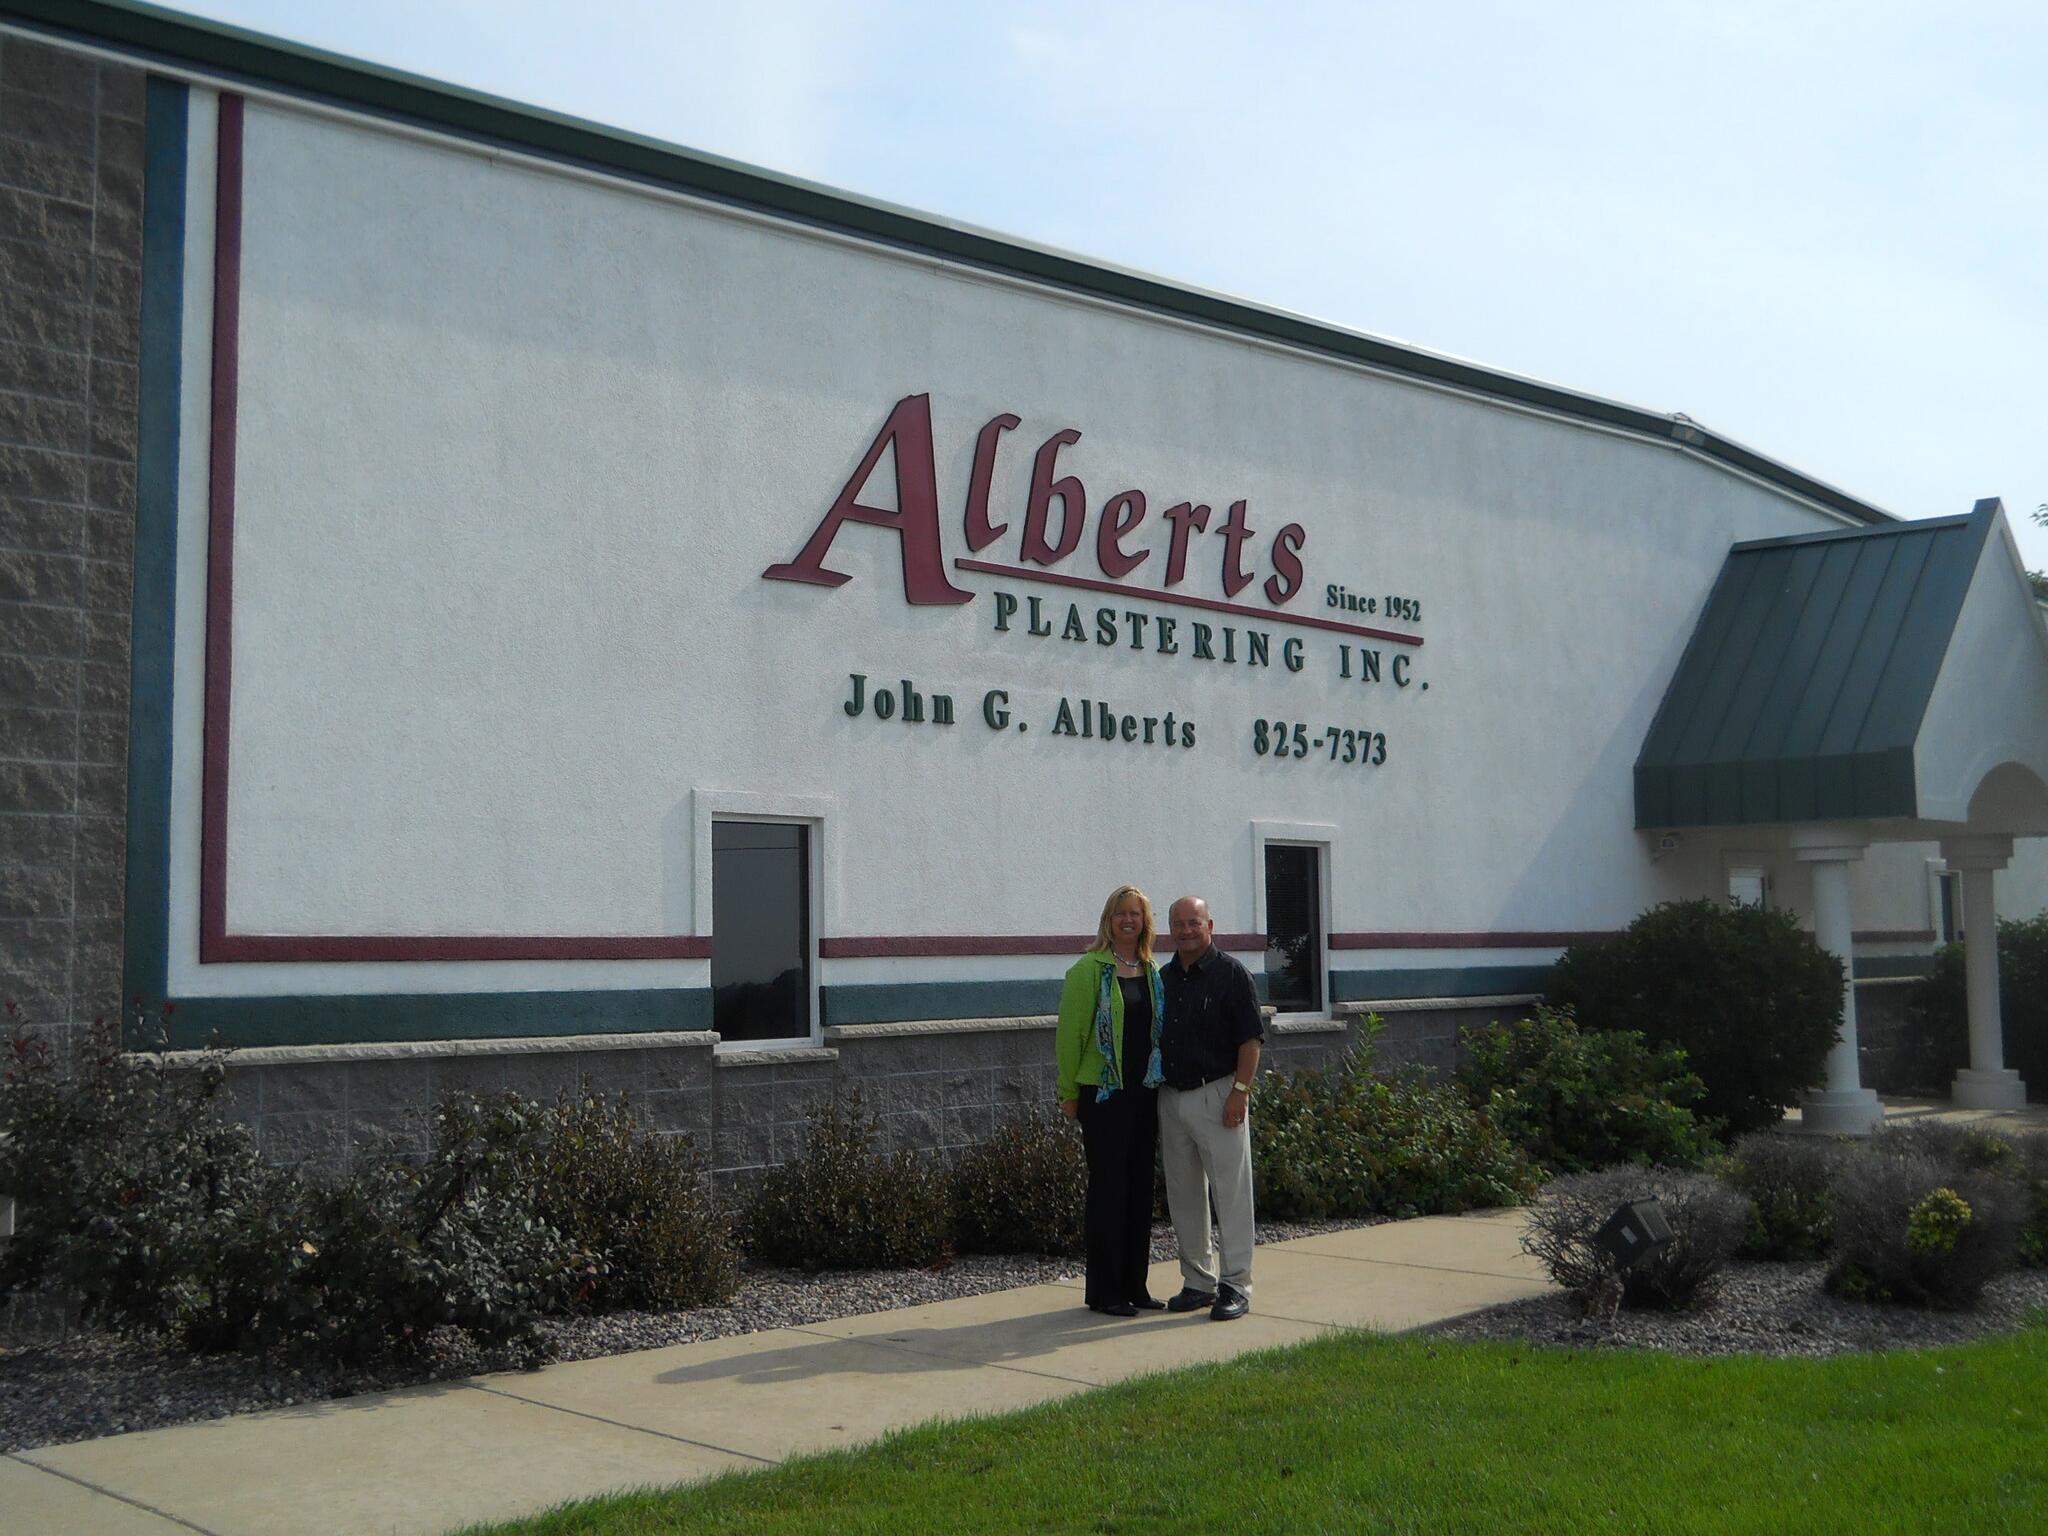 Alberts Plastering Inc 1610 Orchard View Ln, Brussels Wisconsin 54204